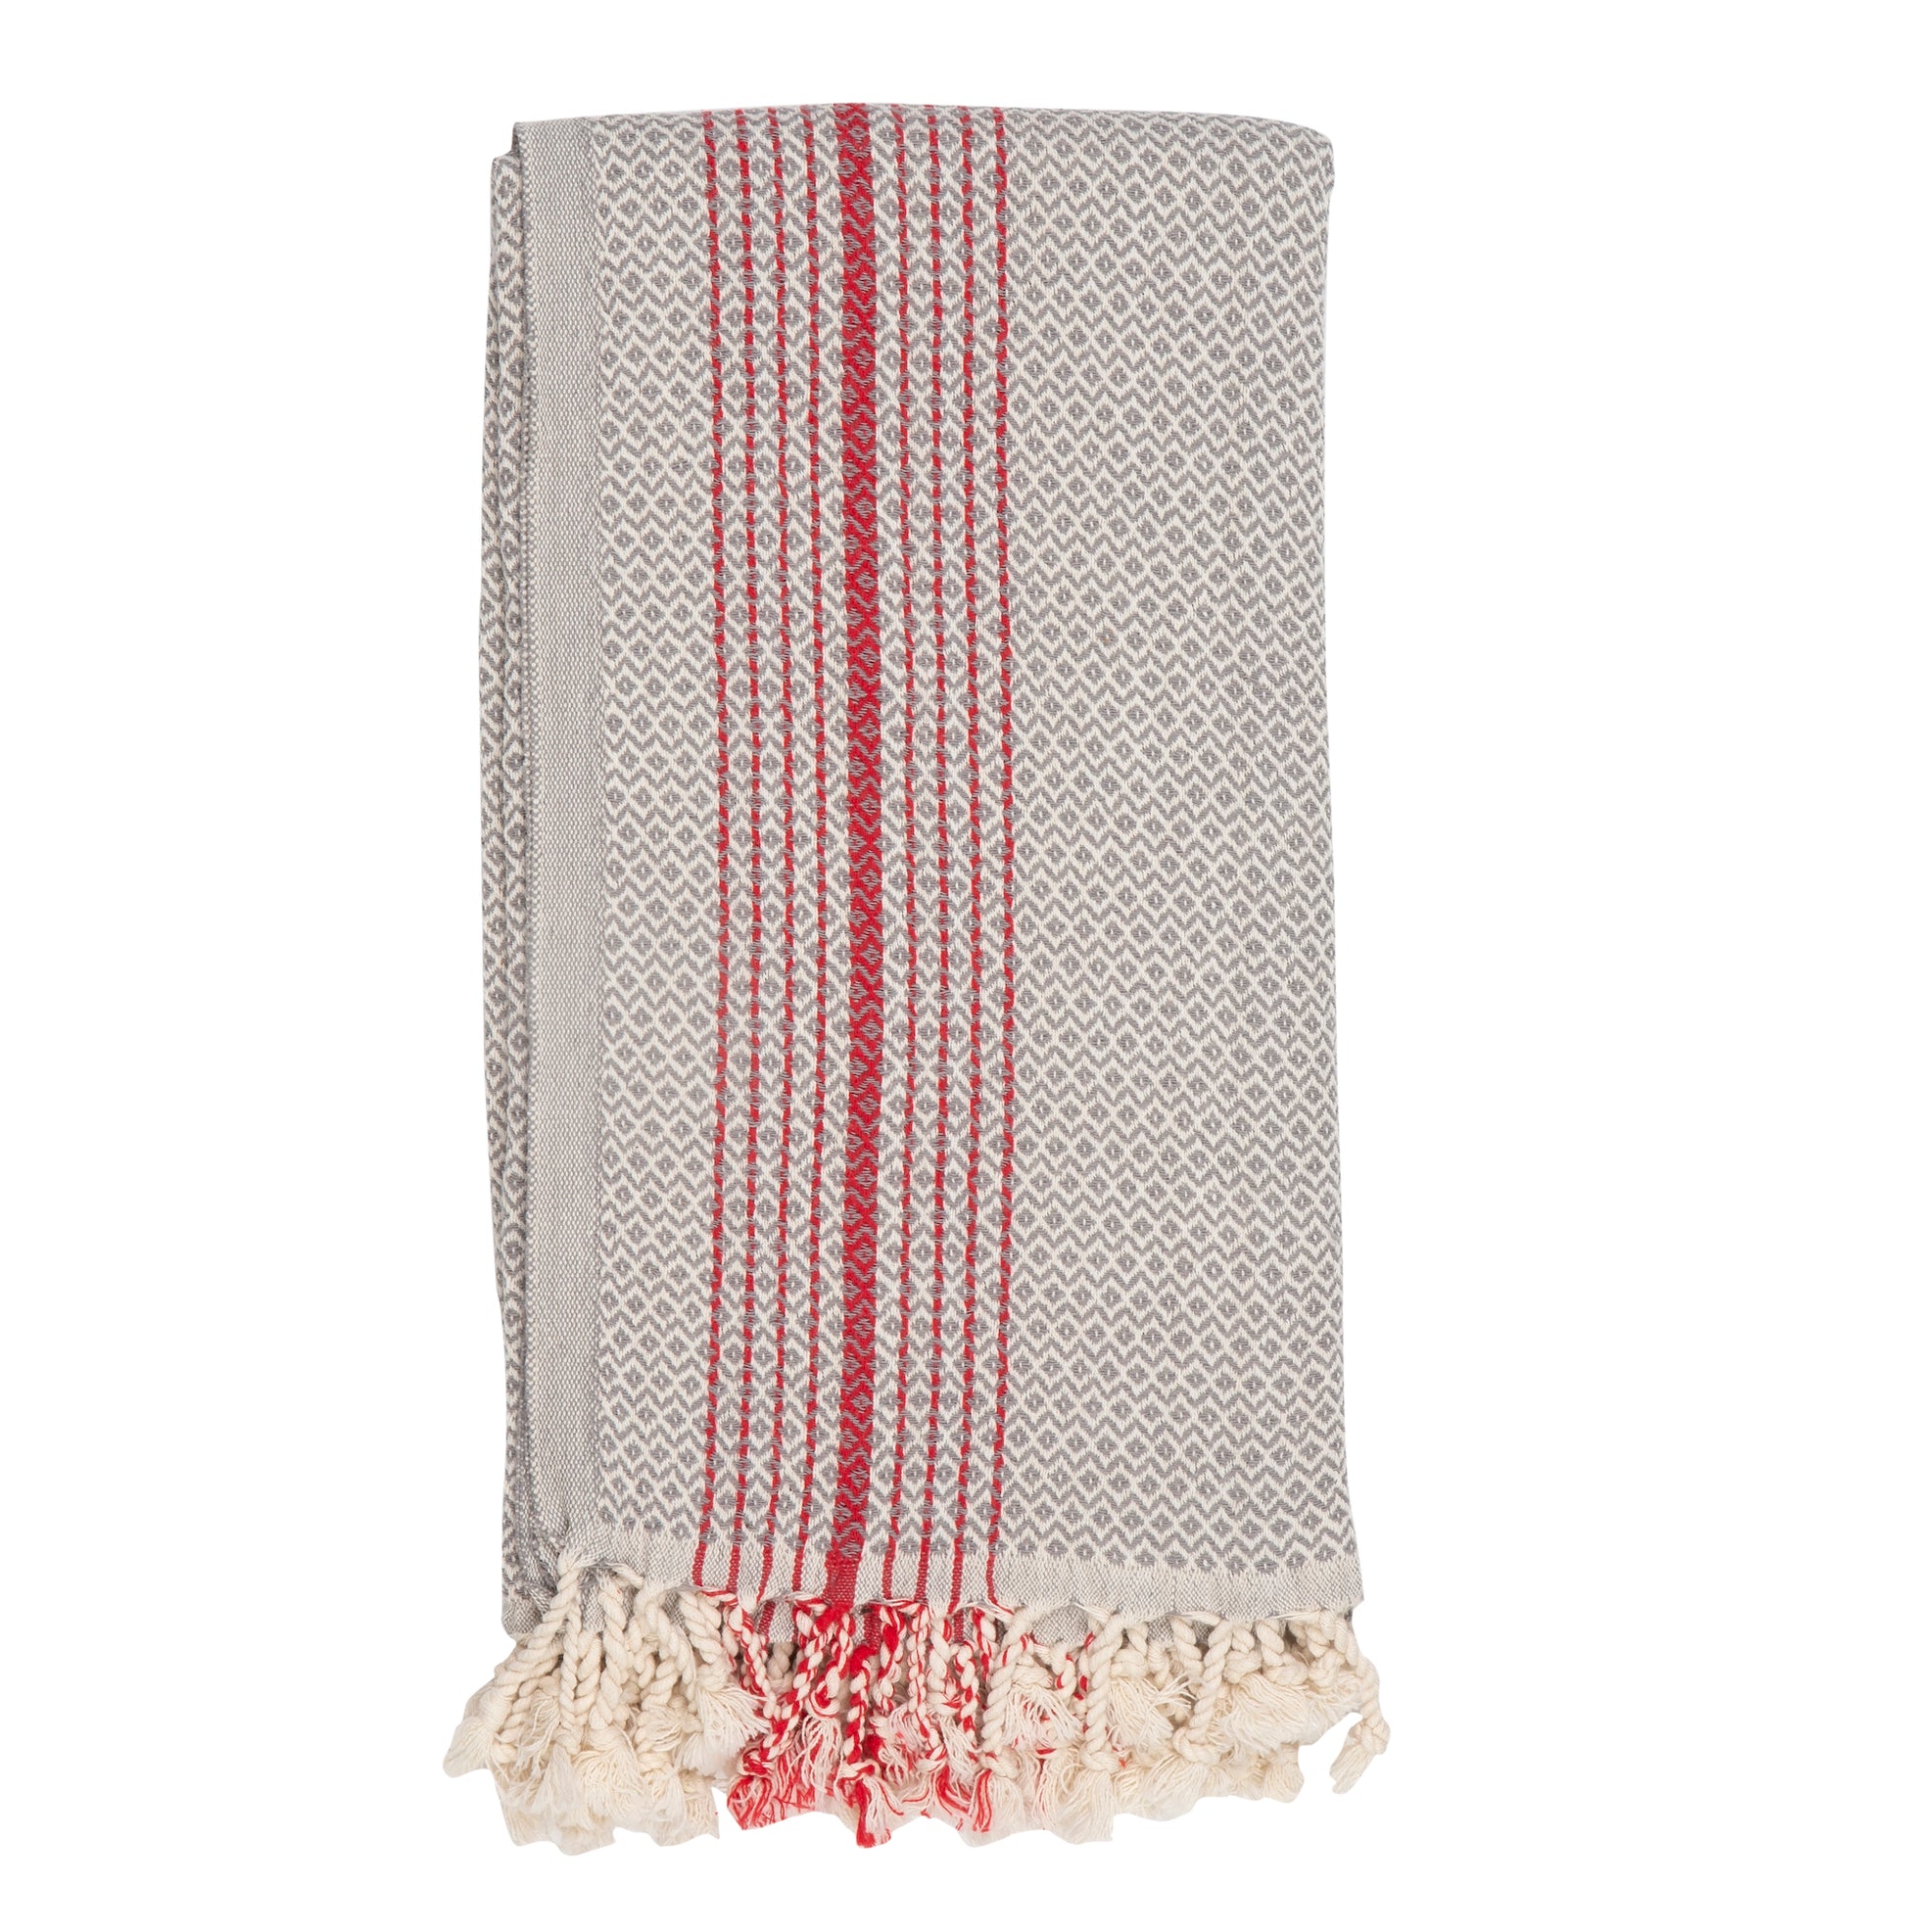 Pale grey Hammam Towel with Red Stripes